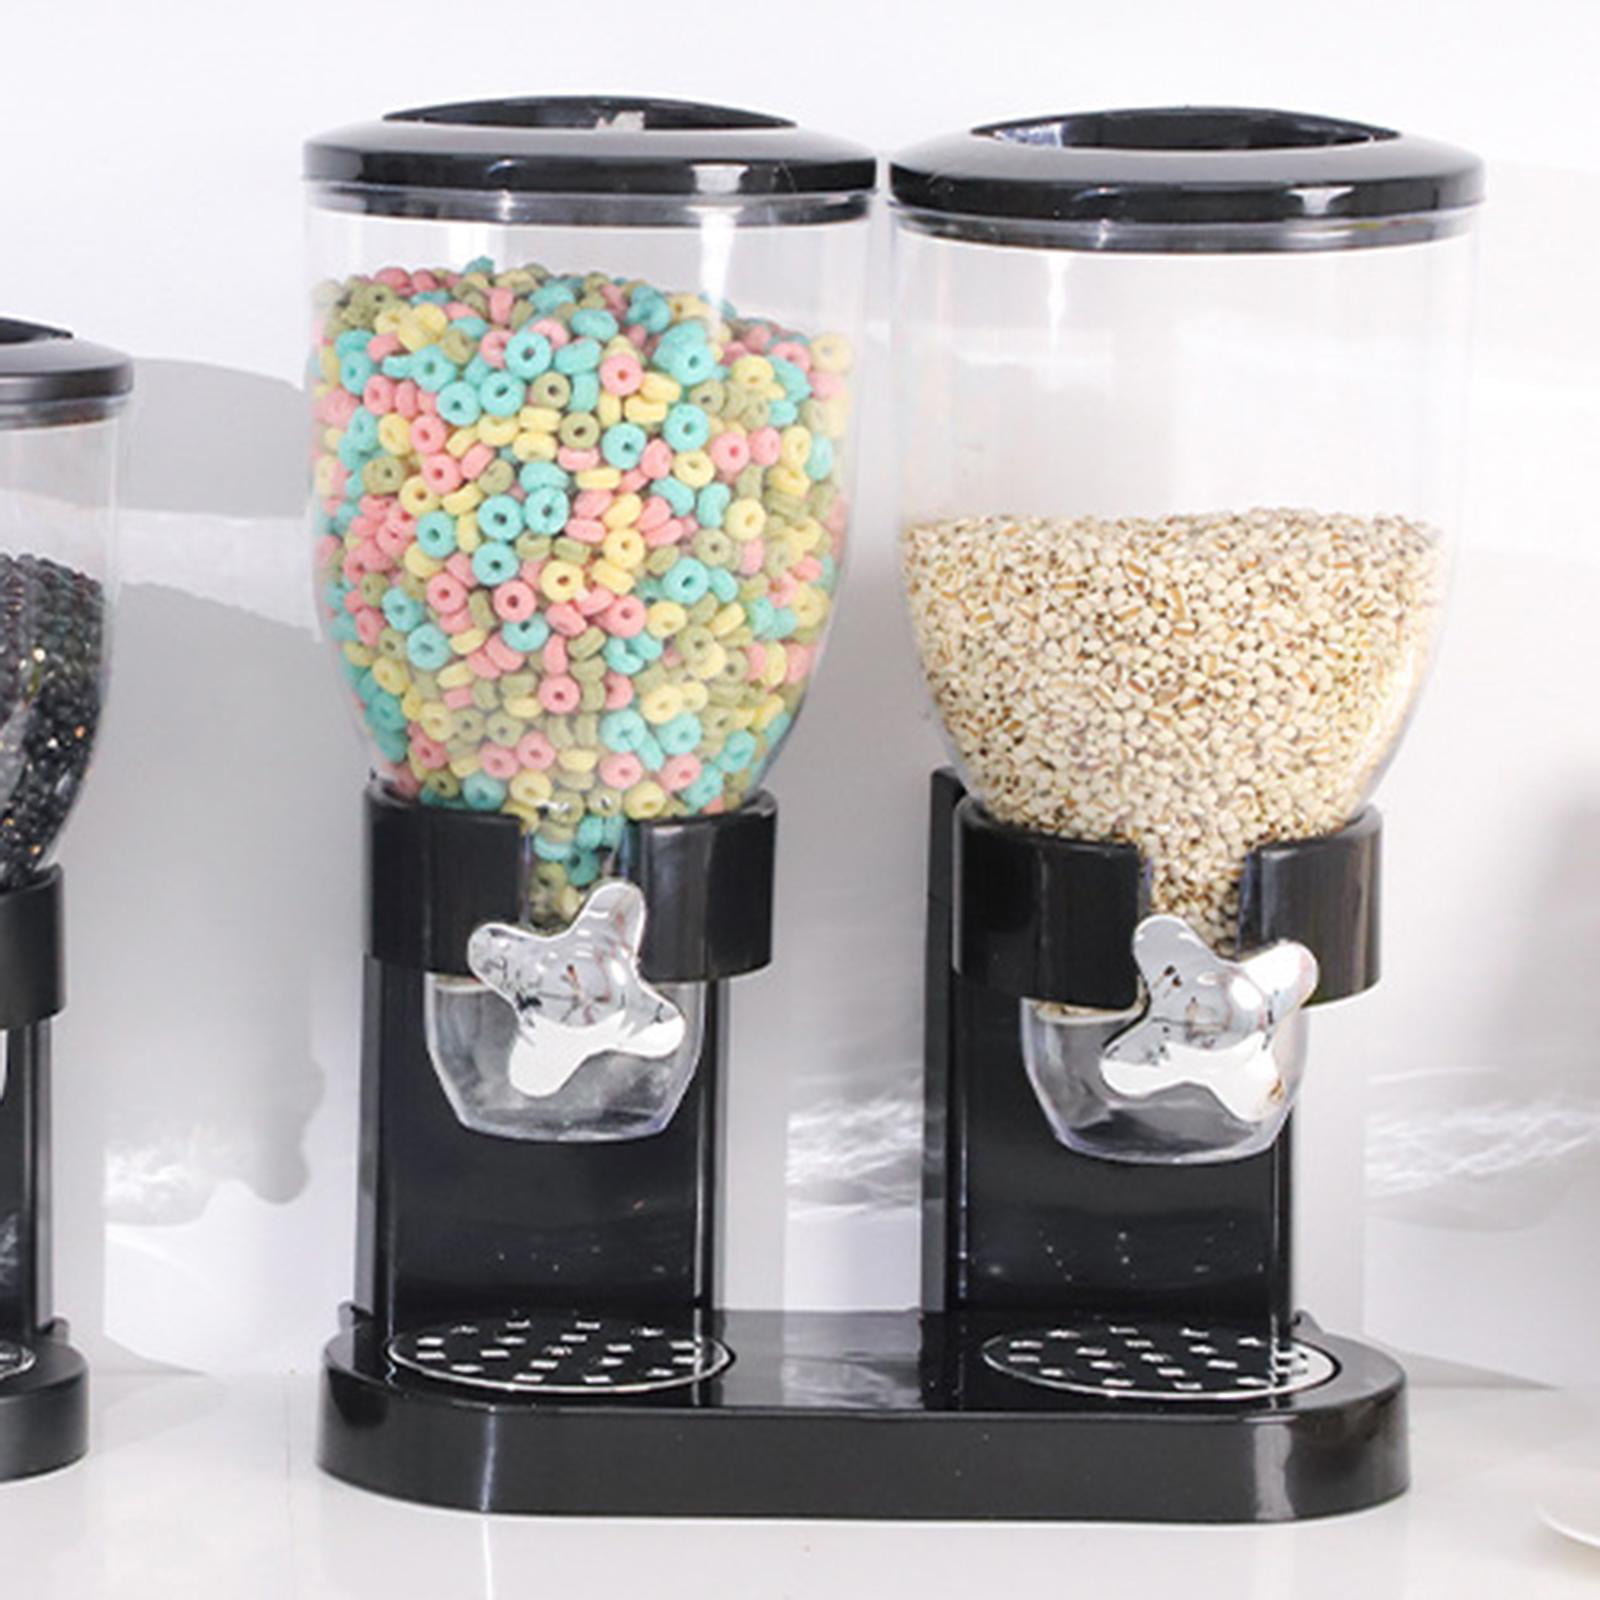 EJWQWQE Cereal Dispenser Countertop With Lids, 5L Organization And Storage  Containers For Kitchen And Pantry, Rice Dispenser For Cereal, Beans